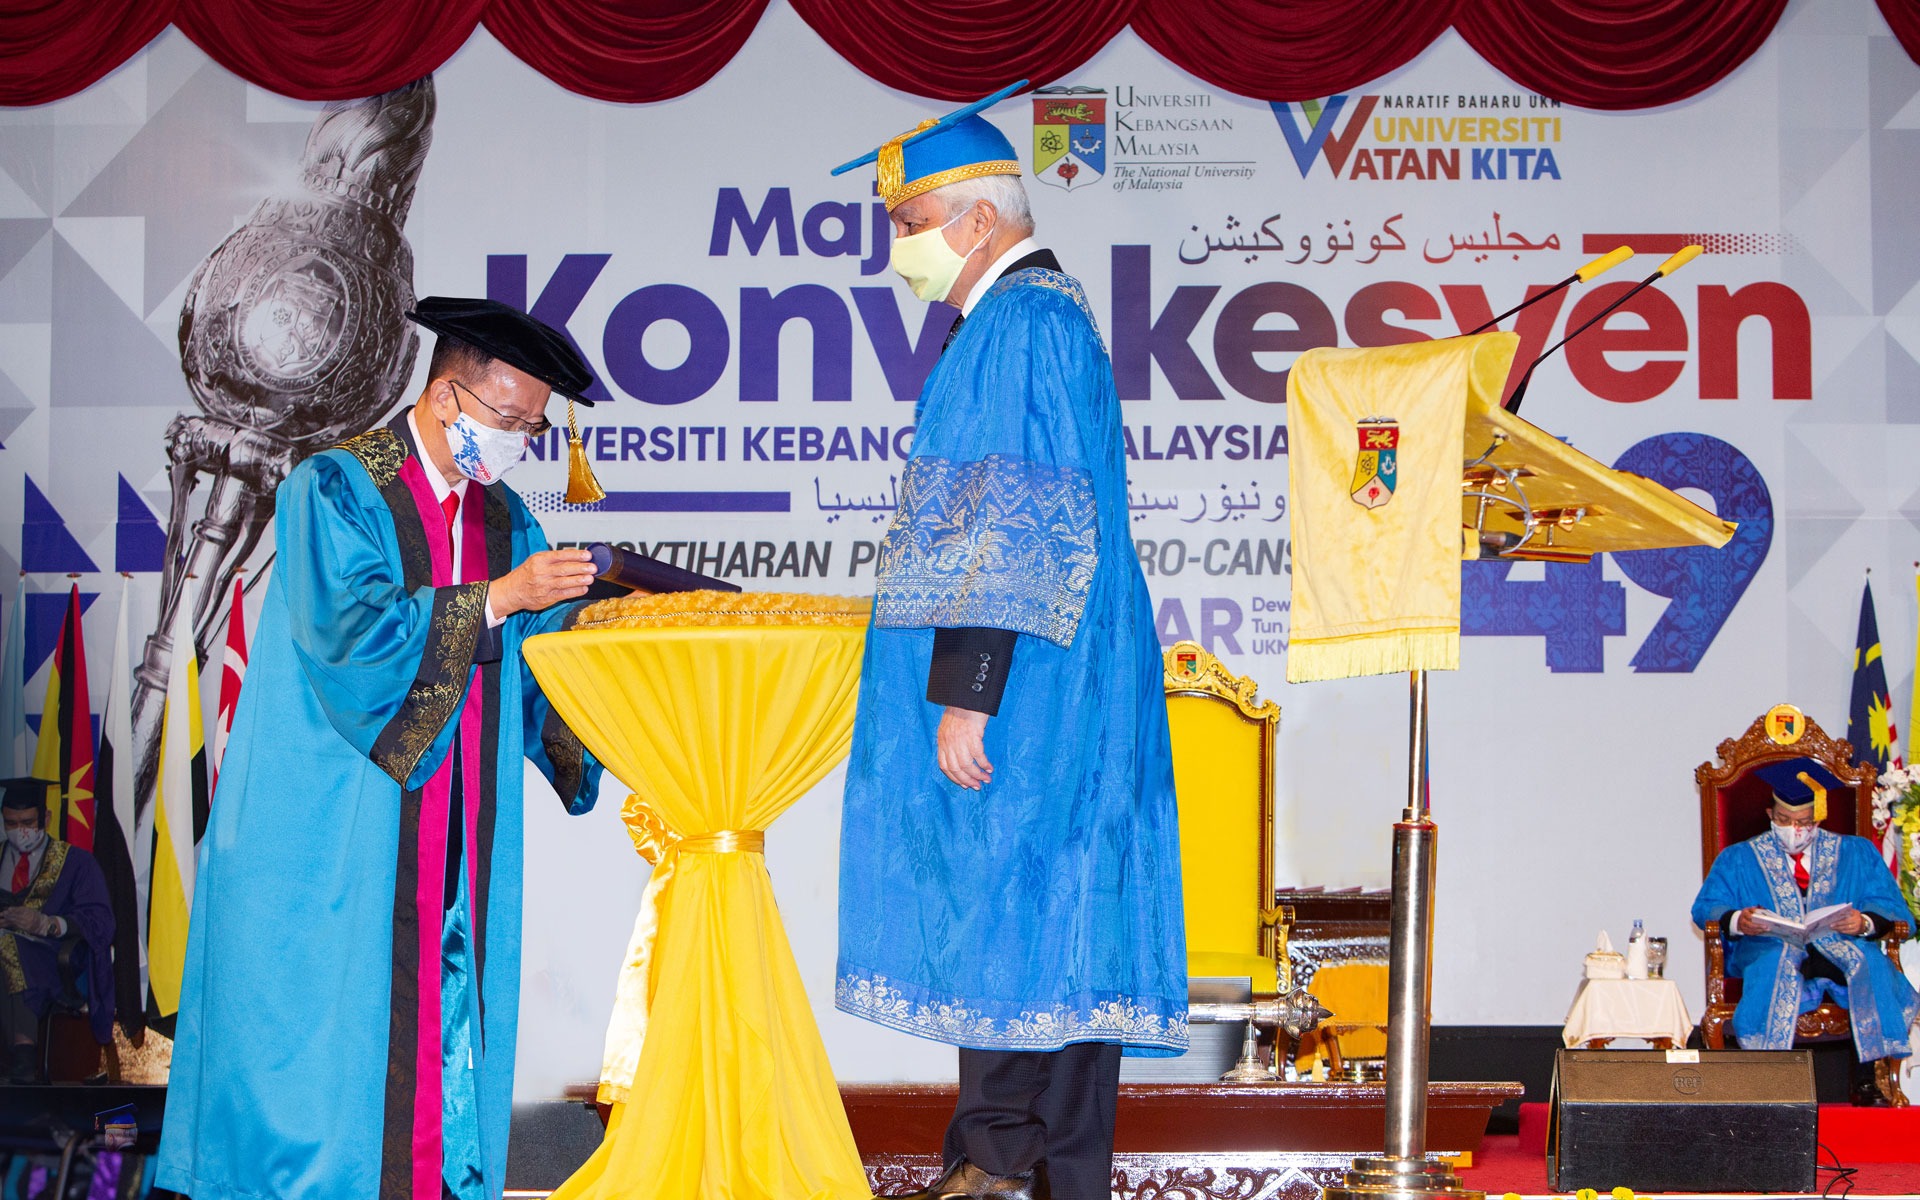 Sunway Group Founder and Chairman Tan Sri Dr. Jeffrey Cheah receiving an honorary doctorate for Leadership in Health Education Network and Sustainability